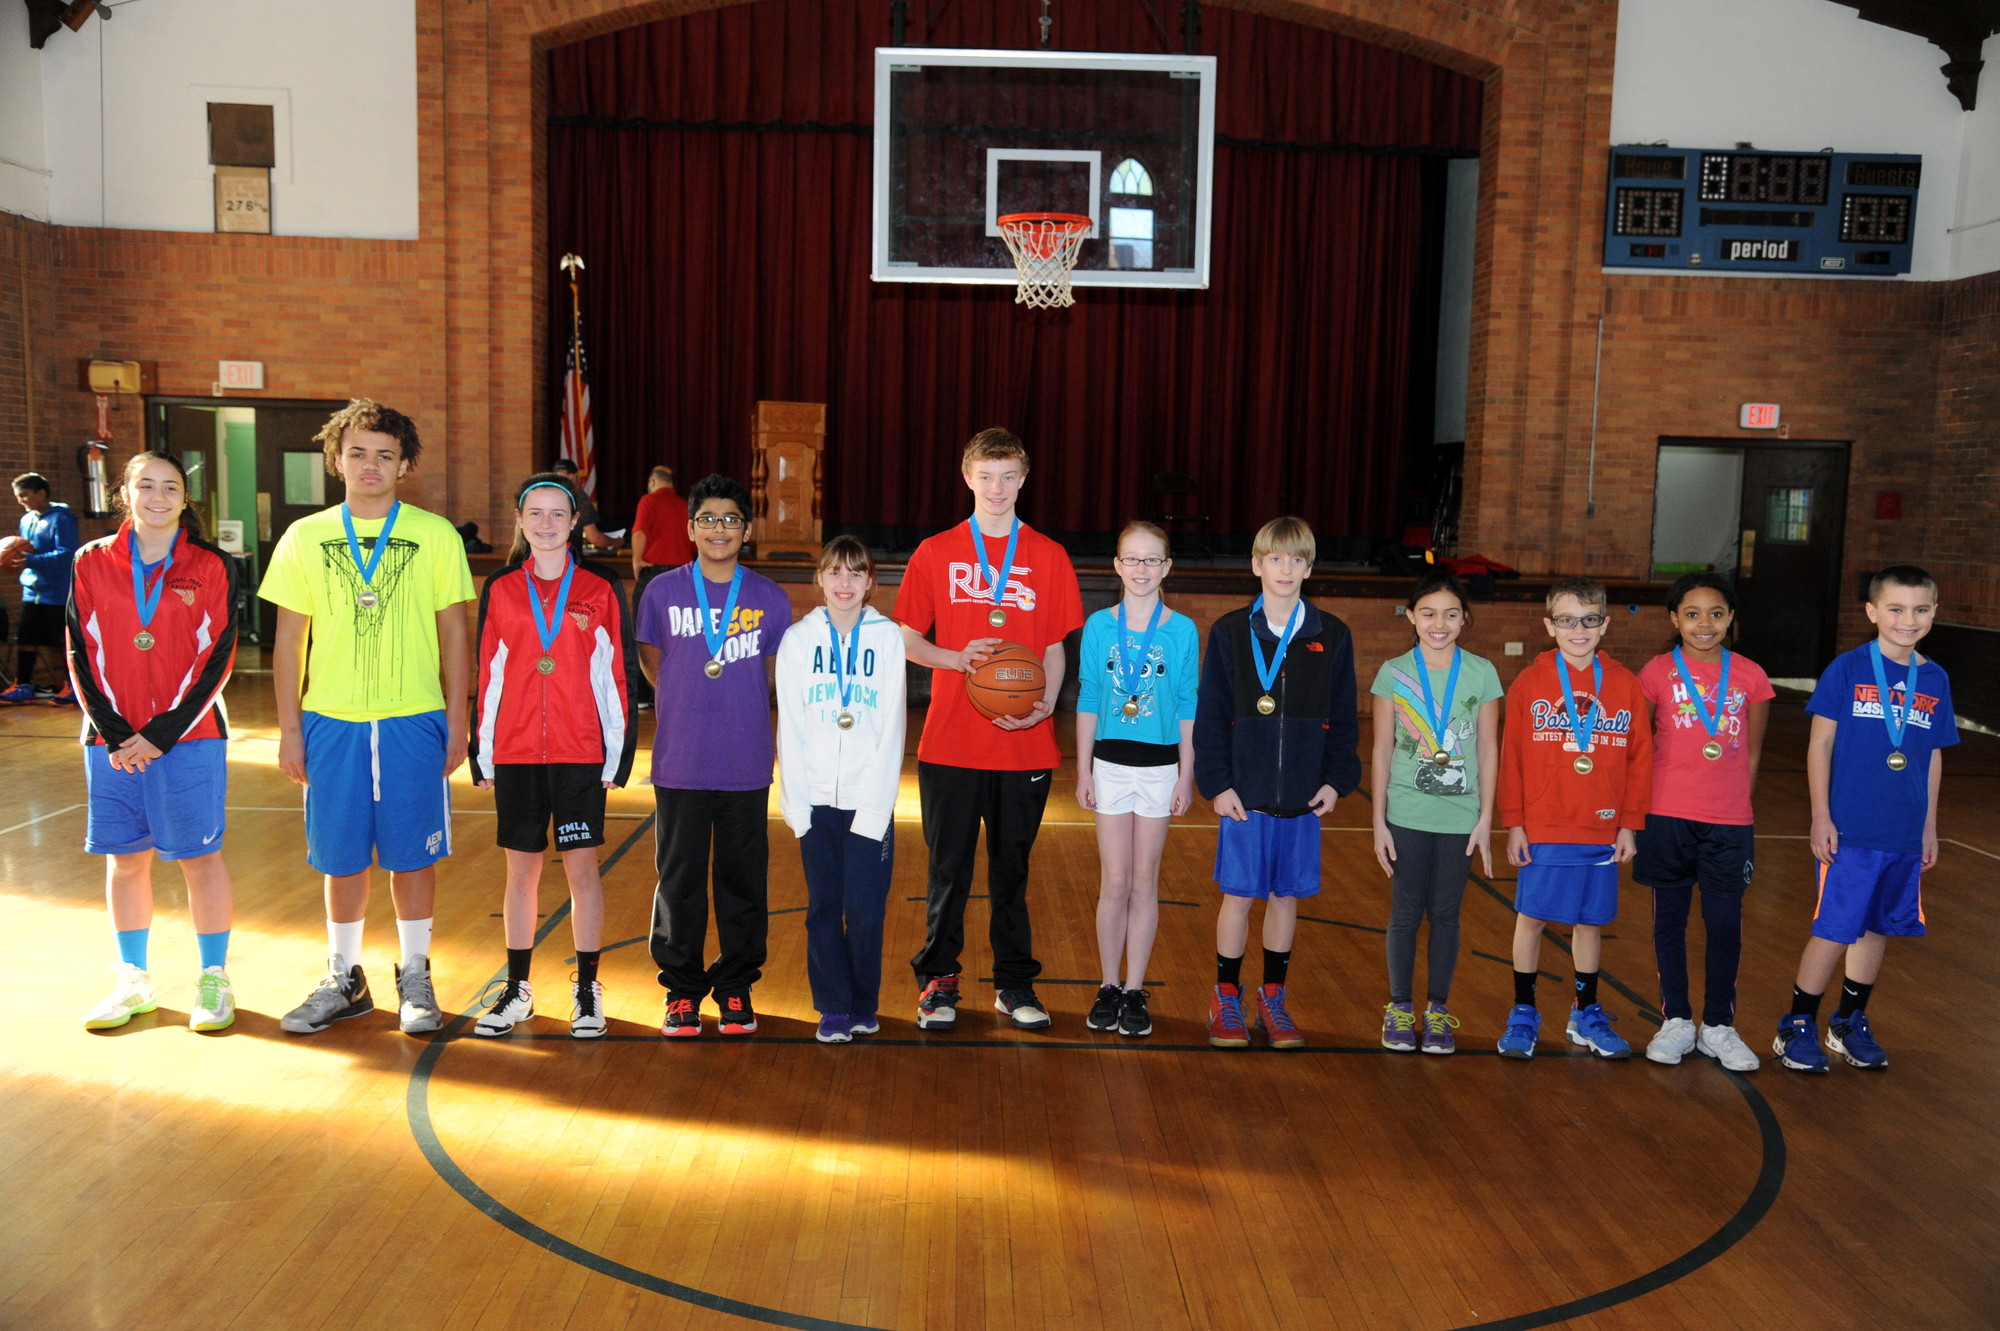 The winner in second second round of the Free-Throw Competition, from left, Danielle Devito, Tyler McCray, Maeve McGovern, Joel Thomas, Kate Grande, Bobby Bressmer, Rachel Wagner, Sean Colbert, Emily Saracino, Katherine Sinclair and Matthew Wallach.